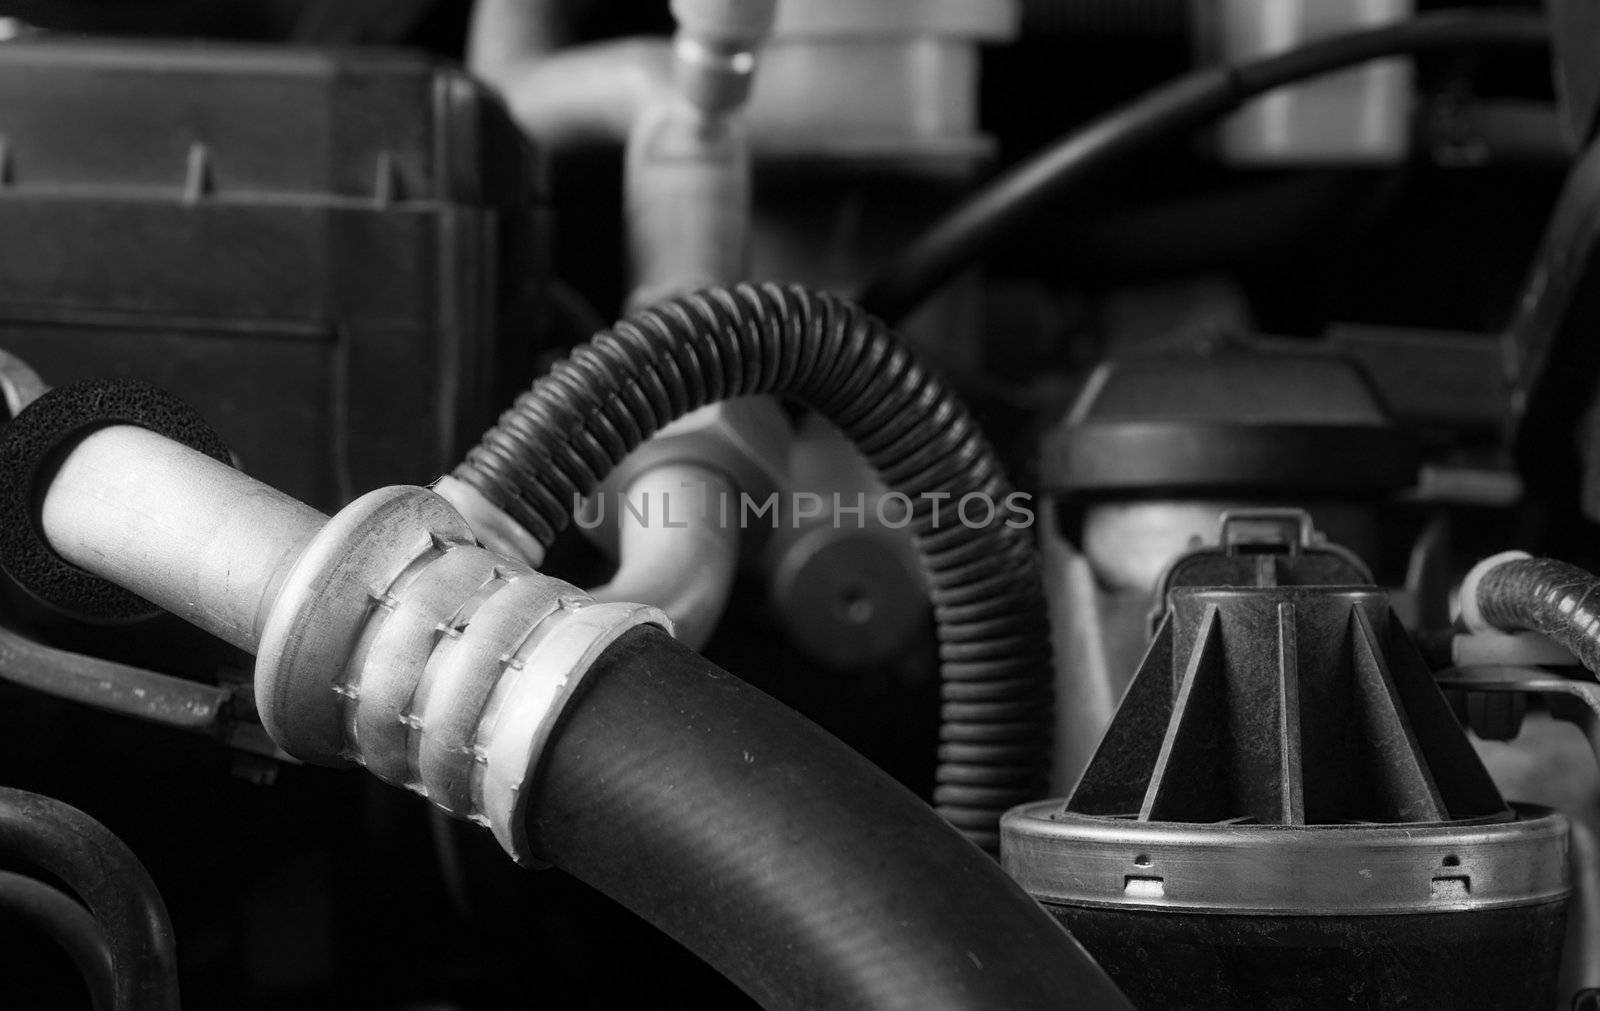 Car engine hose and parts diy maintenance concept theme in black and white